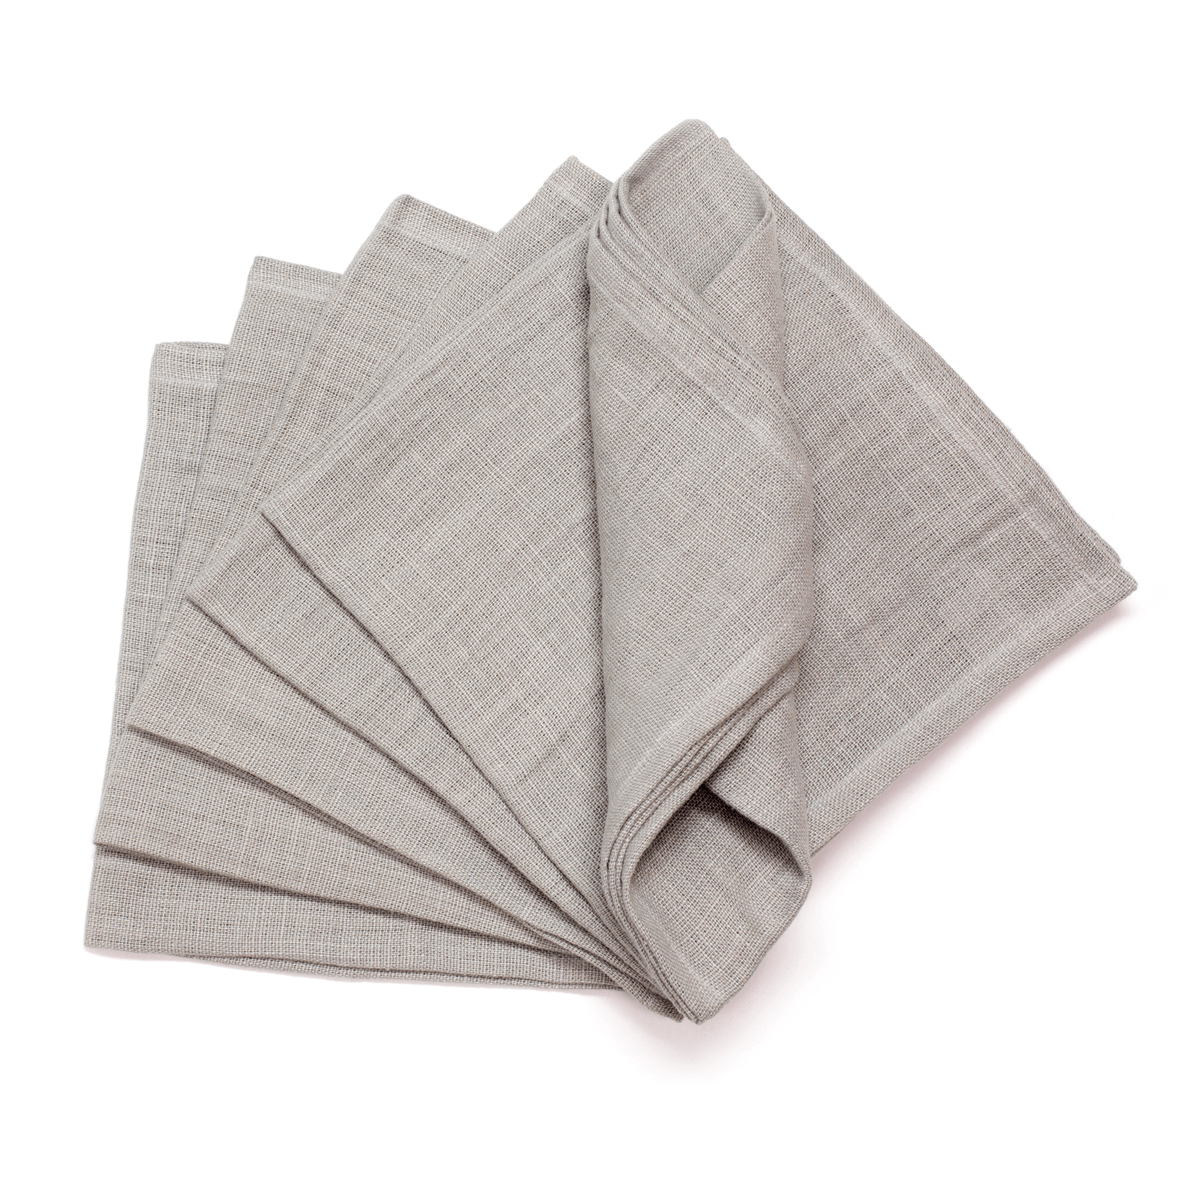 Linen Napkins from Stonewashed Linen